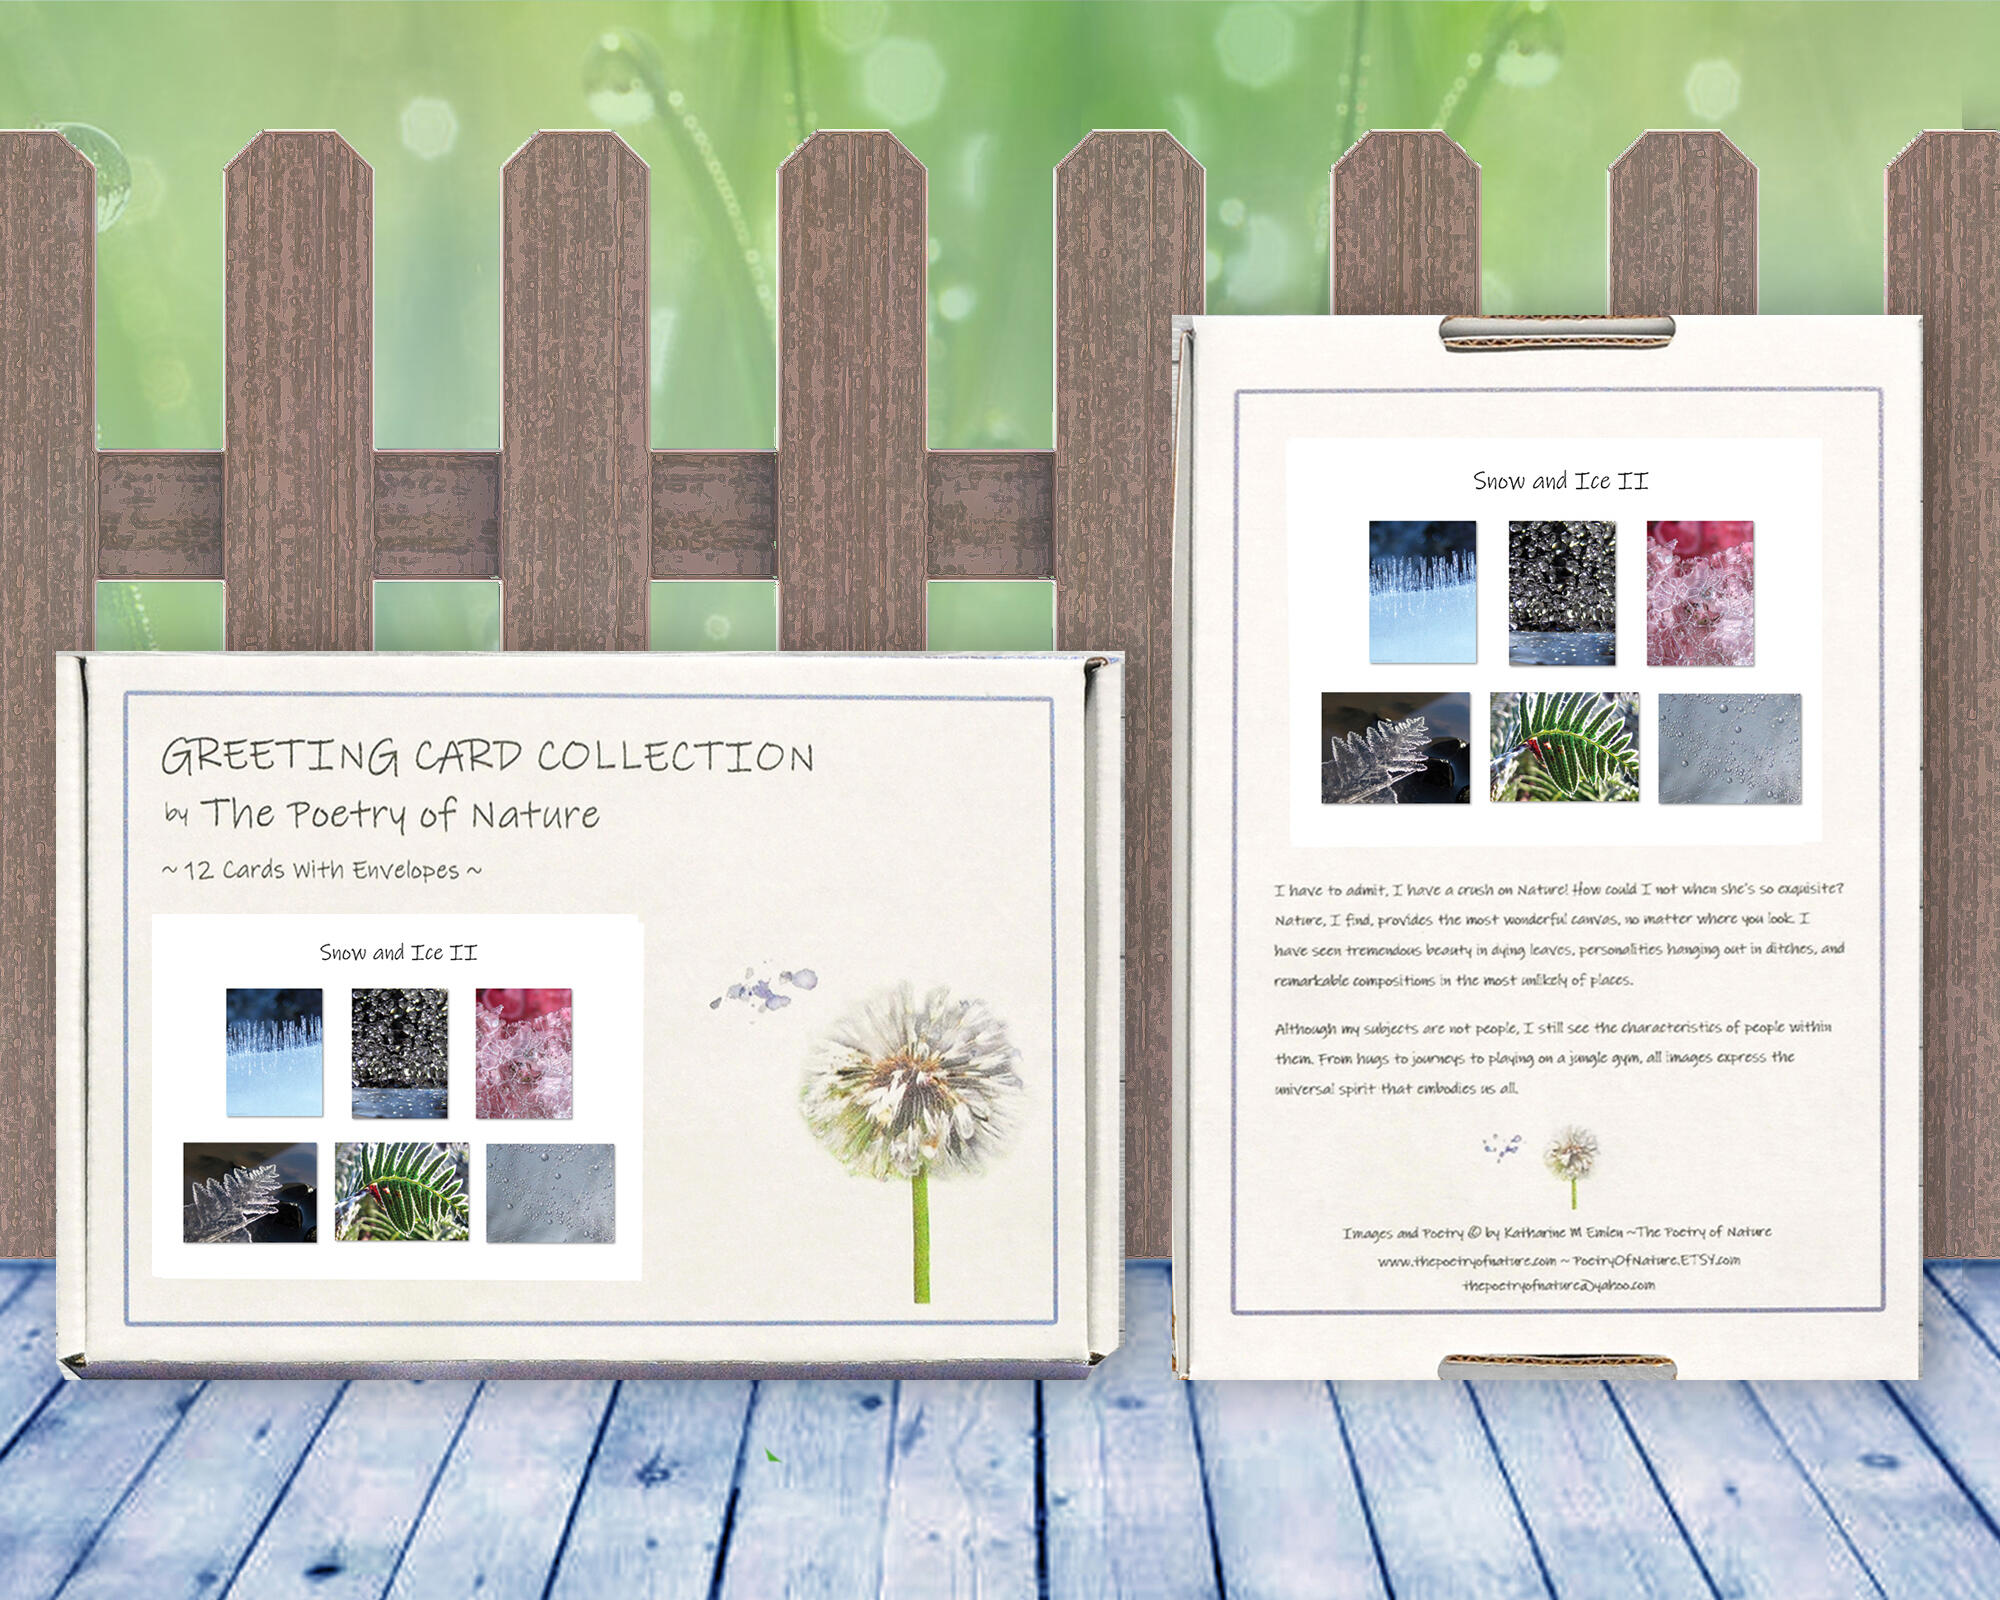 Snow and Ice II   Greeting Card Collection by The Poetry of Nature